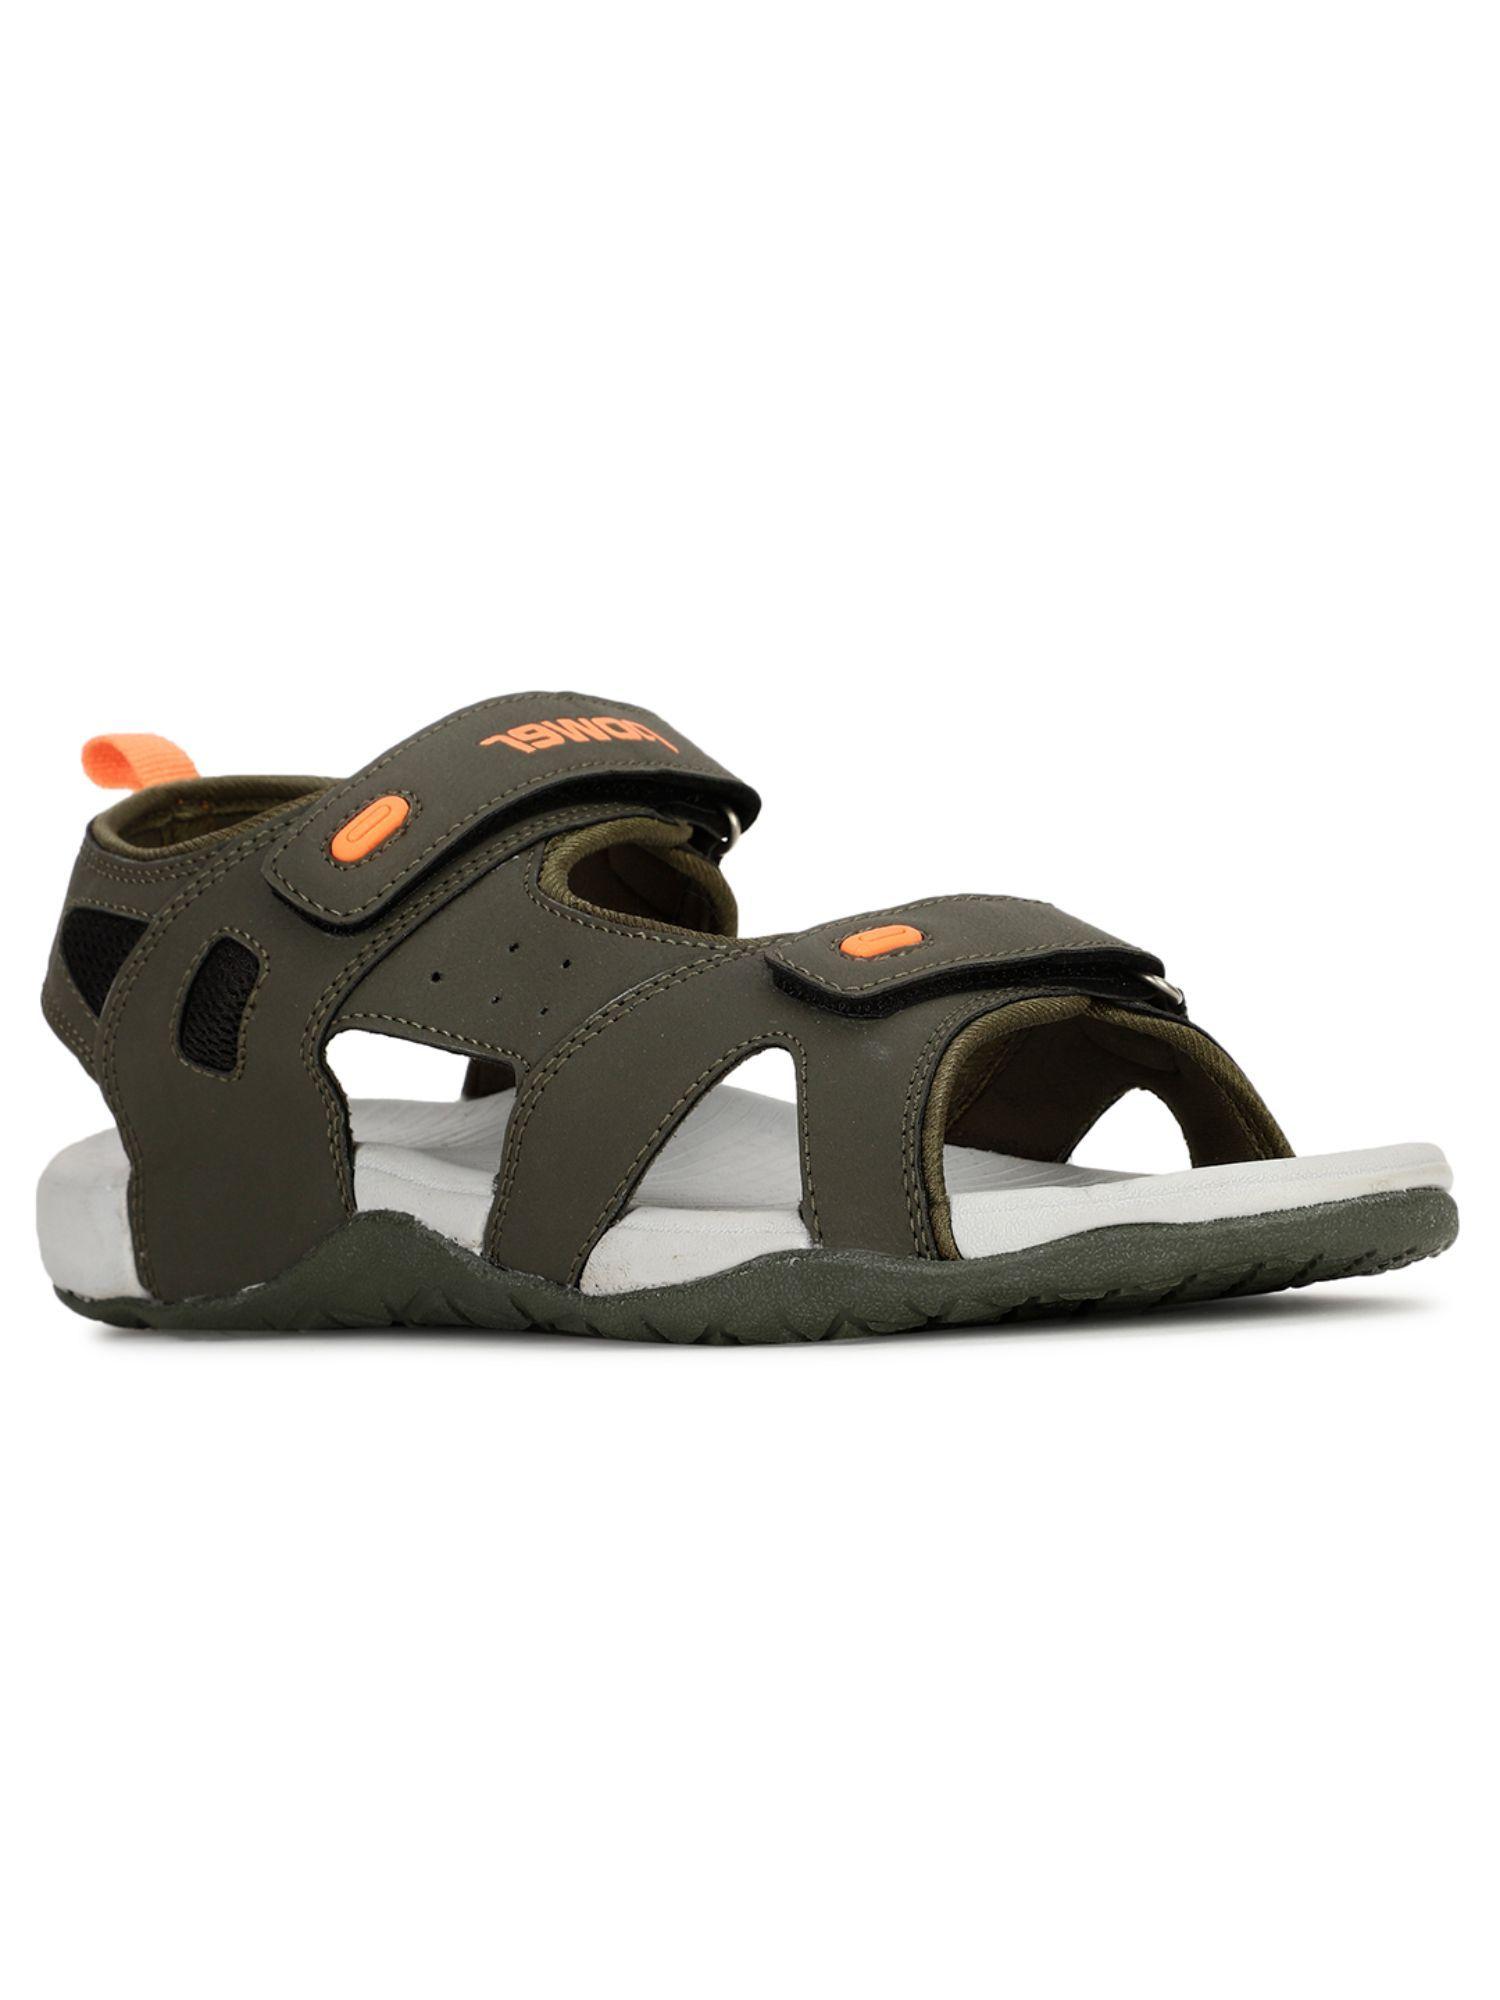 mens-olive-velcro-casual-sandals